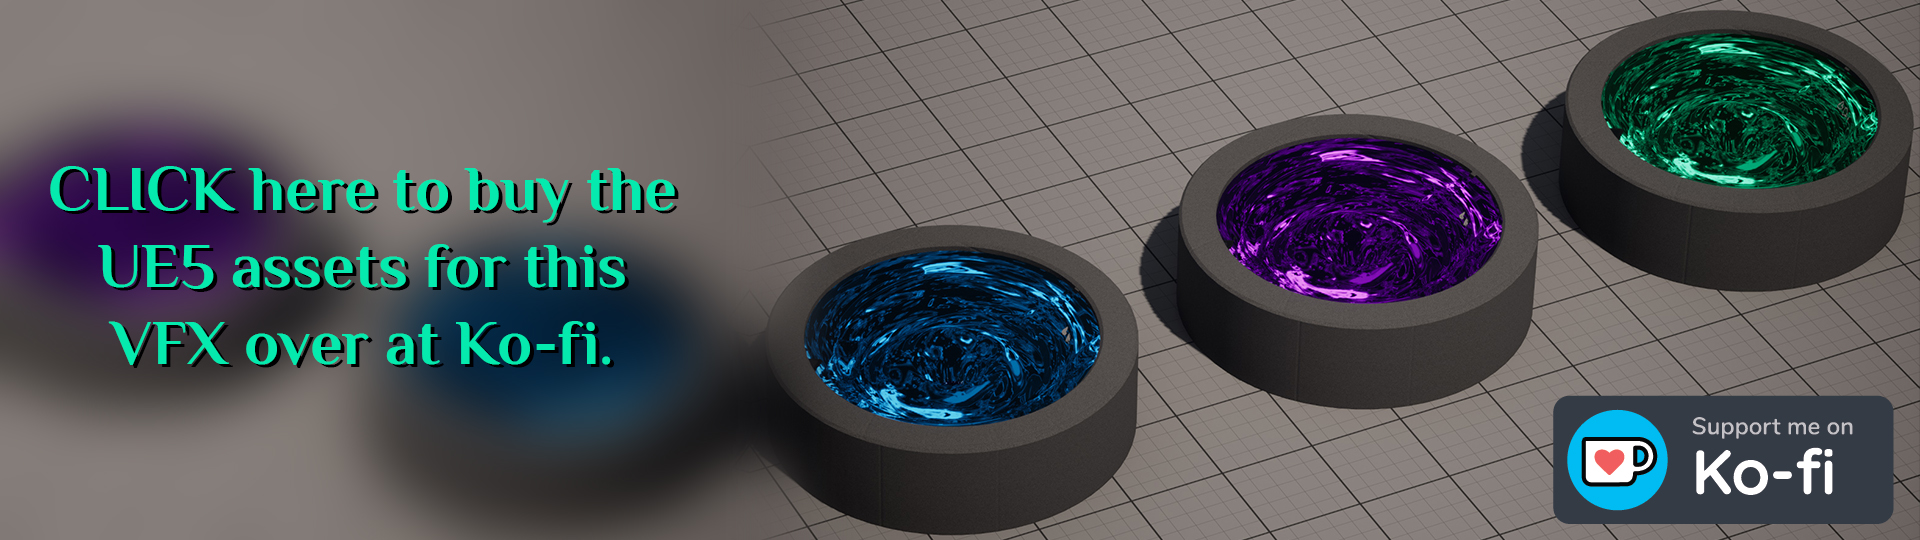 Image link button showing 3 vfx vortex basins. Blue, purple and green one. Text on top reads Click here to buy the UE5 assets for this VFX over at Ko-fi.